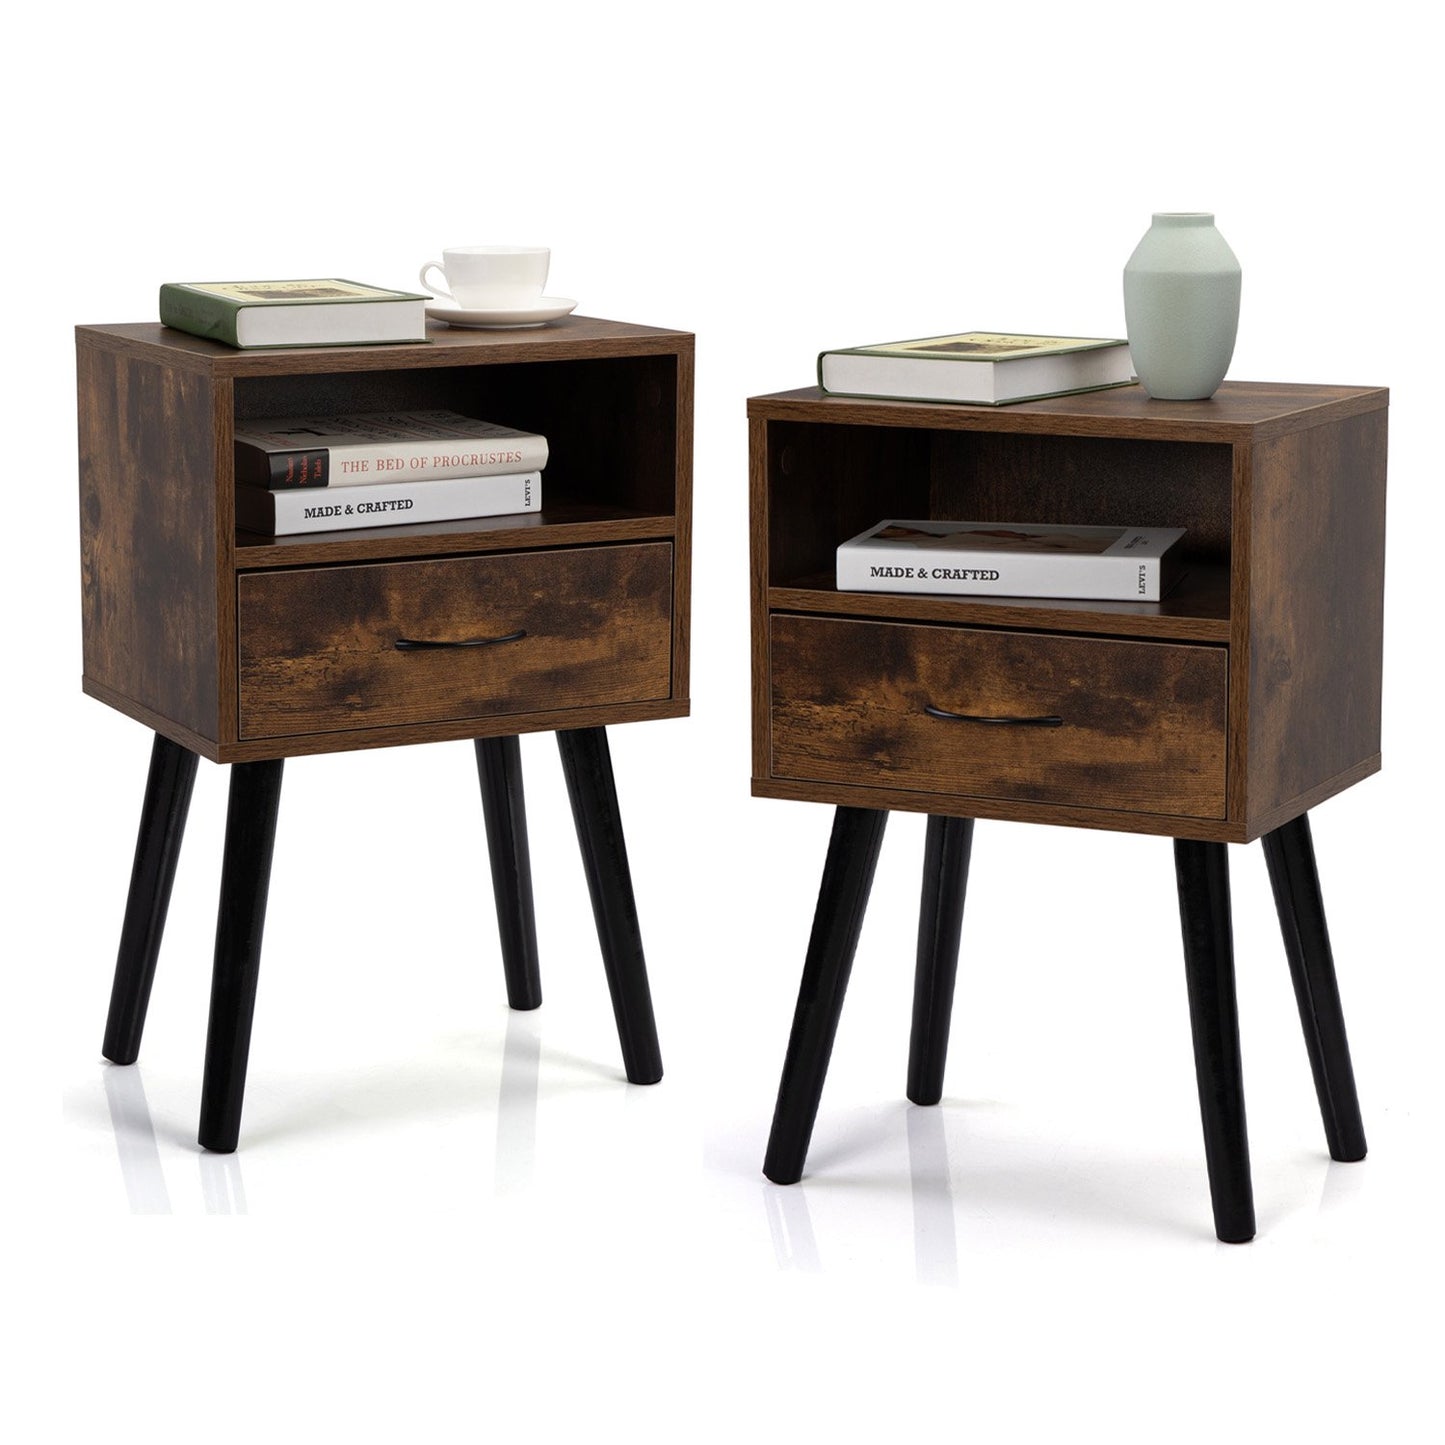 SYNGAR Rustic Nightstand Set of 2, Nightstand with Drawers, Side Tables End Table for Living Room Bedroom